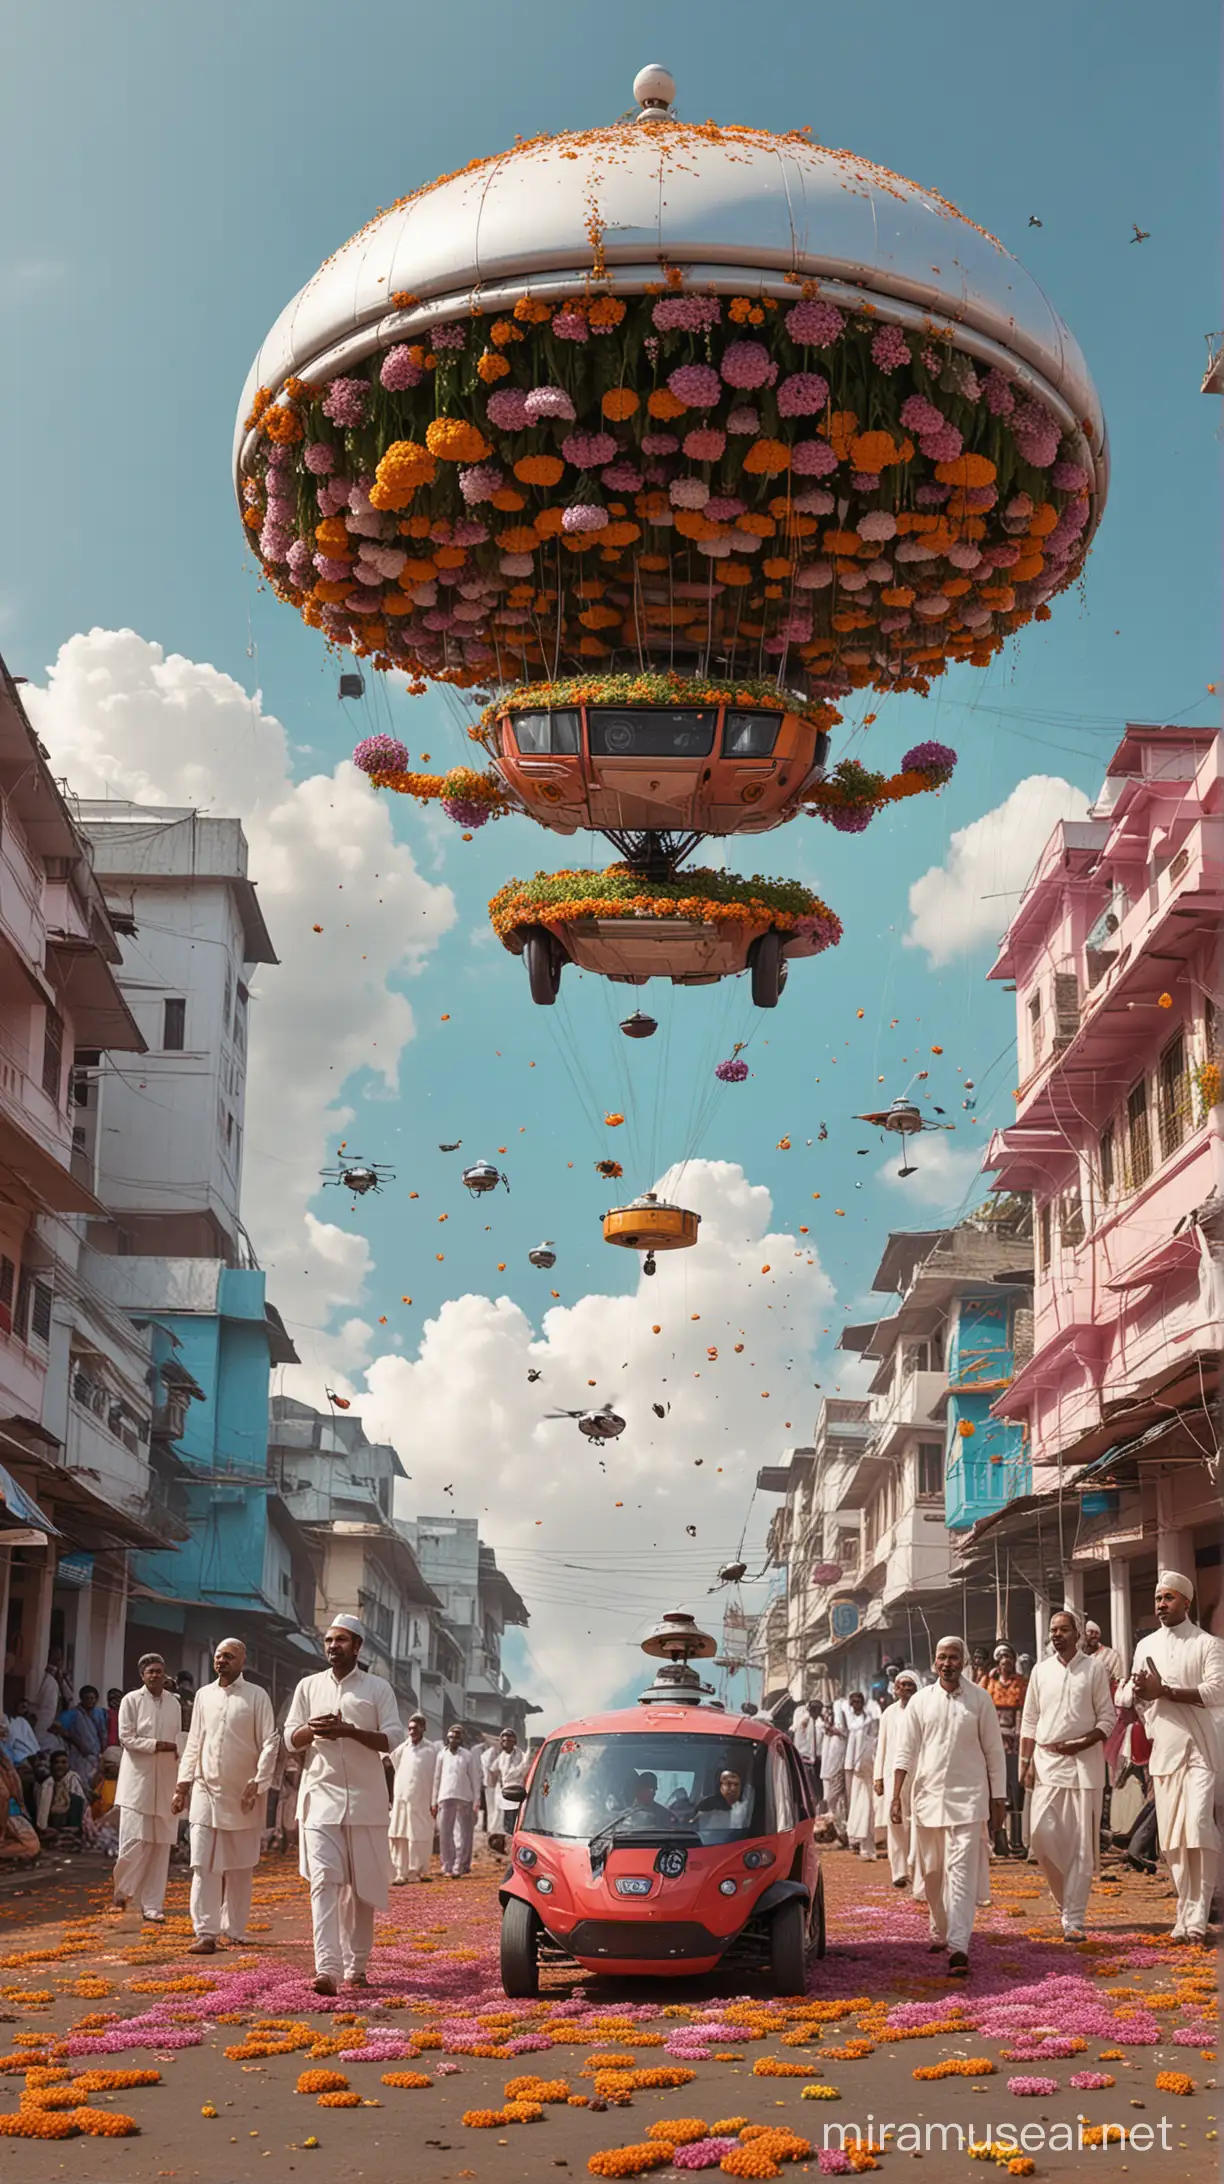 Futuristic Food Delivery Pod in Kerala with Drones and Holographic Displays